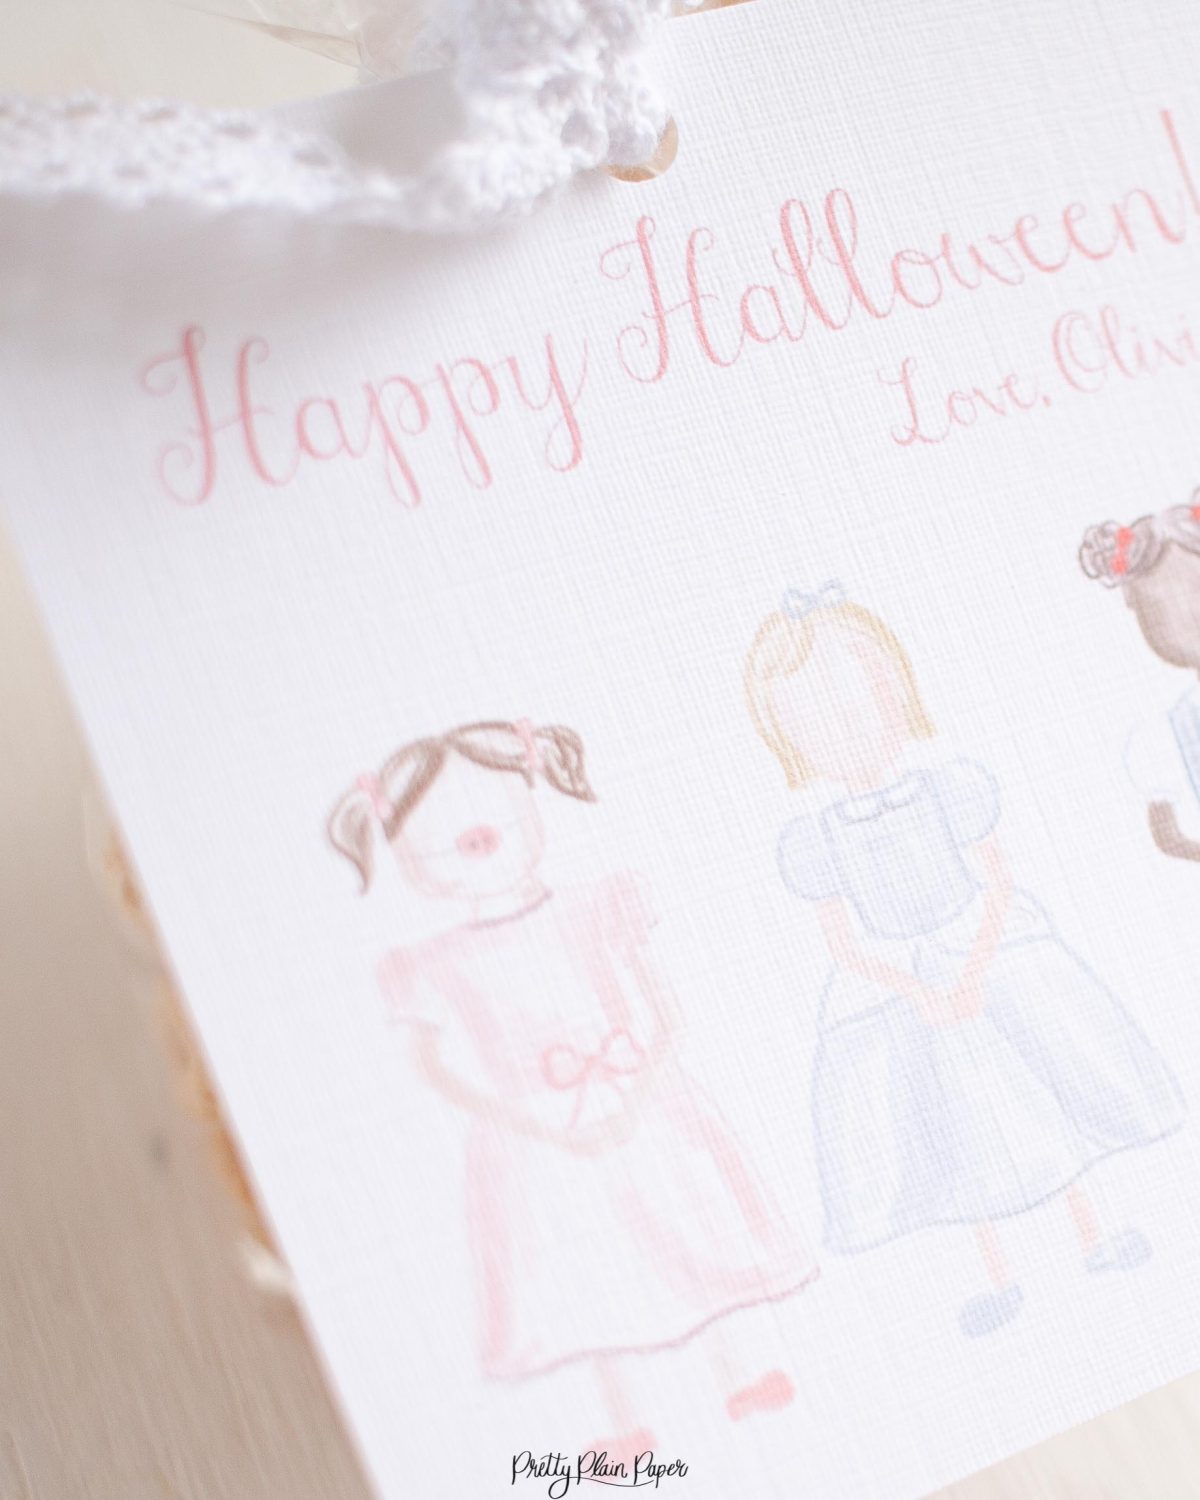 Watercolor Trick or Treaters Little Girls in Costume Halloween Favor, Treat, Gift Tag by Pretty Plain Paper